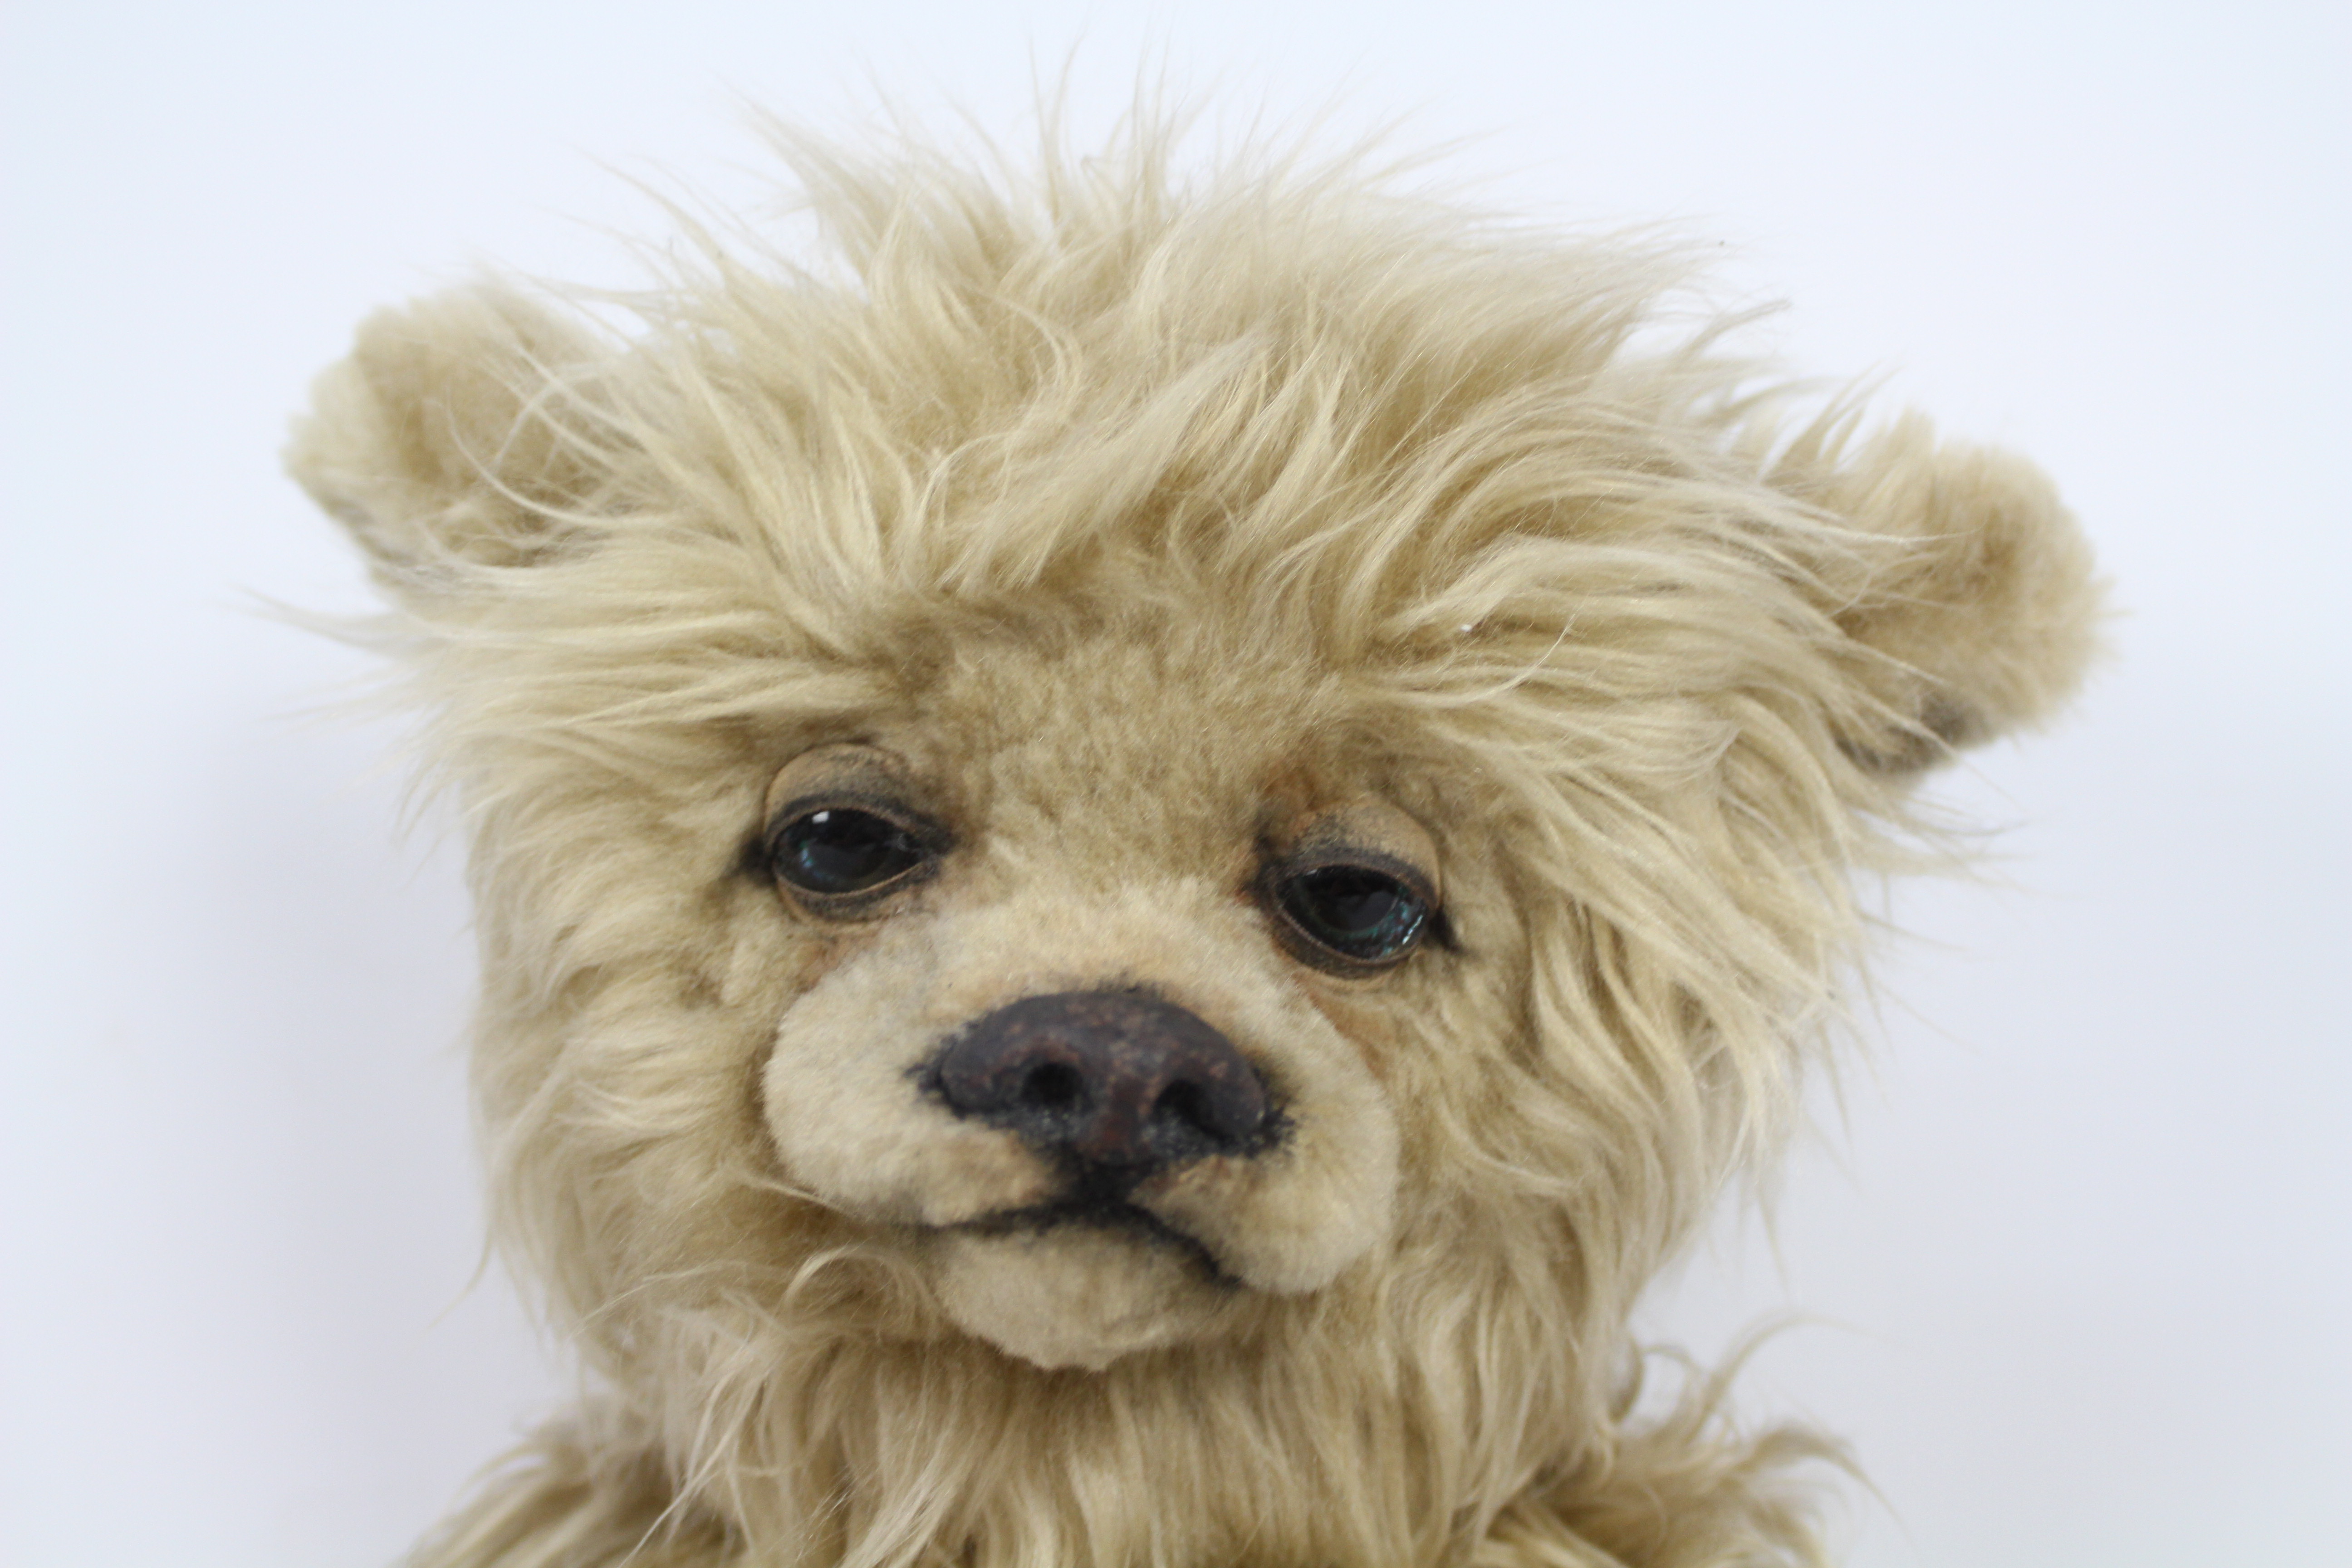 Melisa's Bears - A one of a kind golden faux fur bear named Lizzie made by the Canadian company - Image 2 of 4